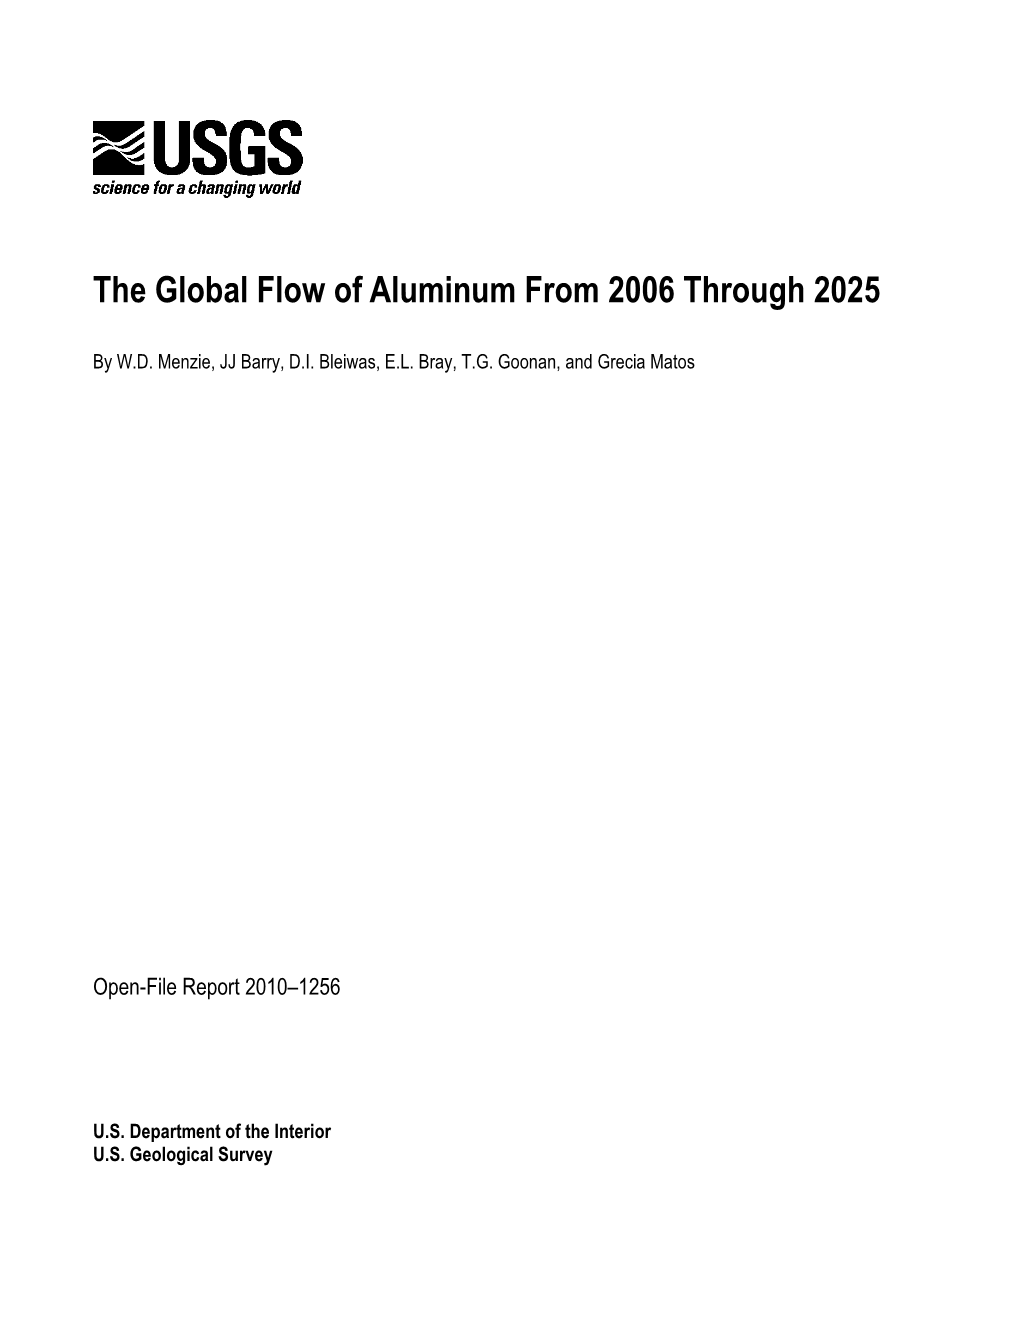 The Global Flow of Aluminum from 2006 Through 2025